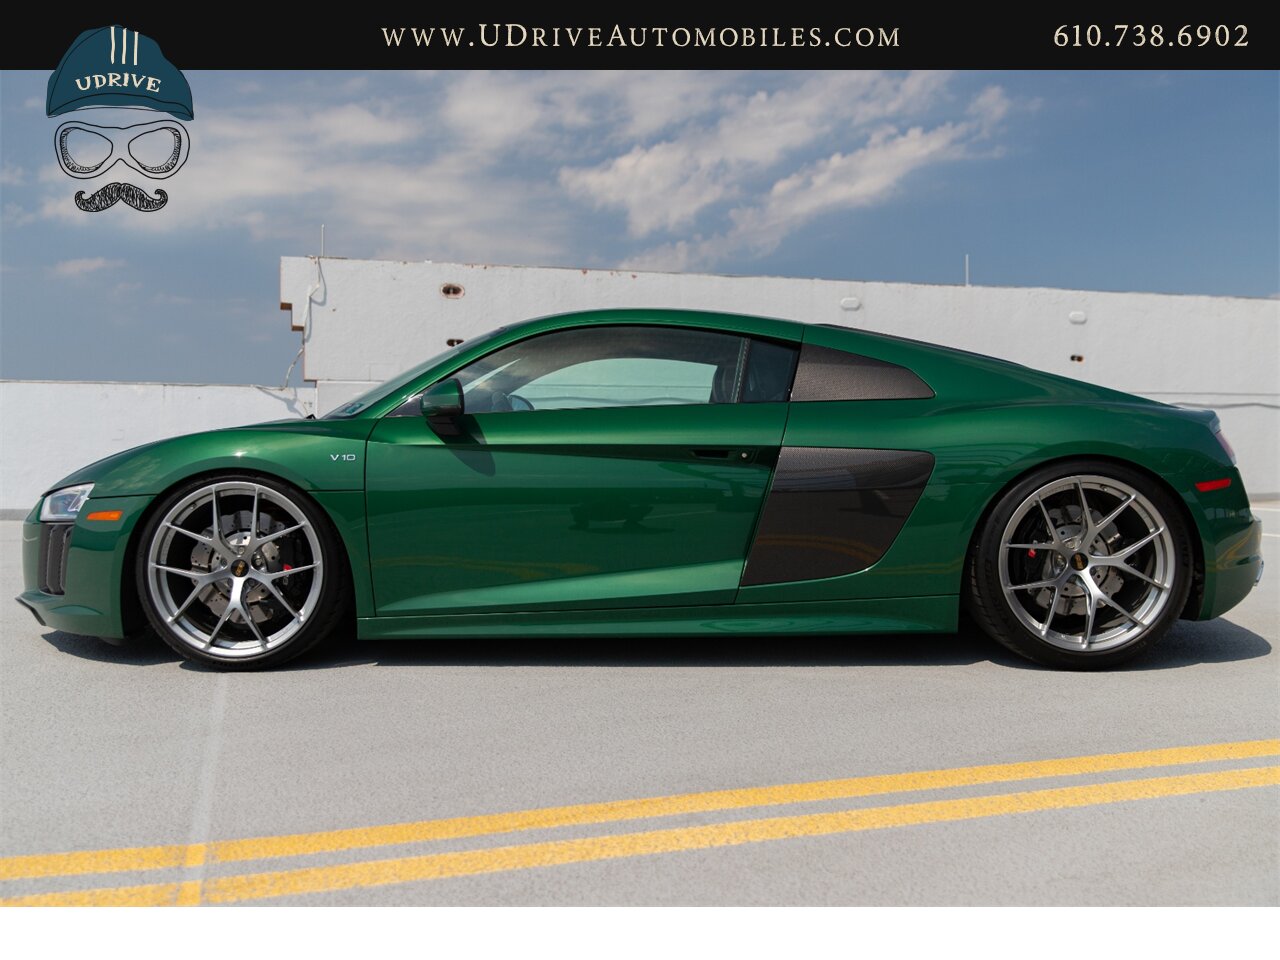 2017 Audi R8 Audi Exclusive Avocado Green Vermont Brown Leather  Diamond Stitching V10 Carbon Fiber - Photo 9 - West Chester, PA 19382